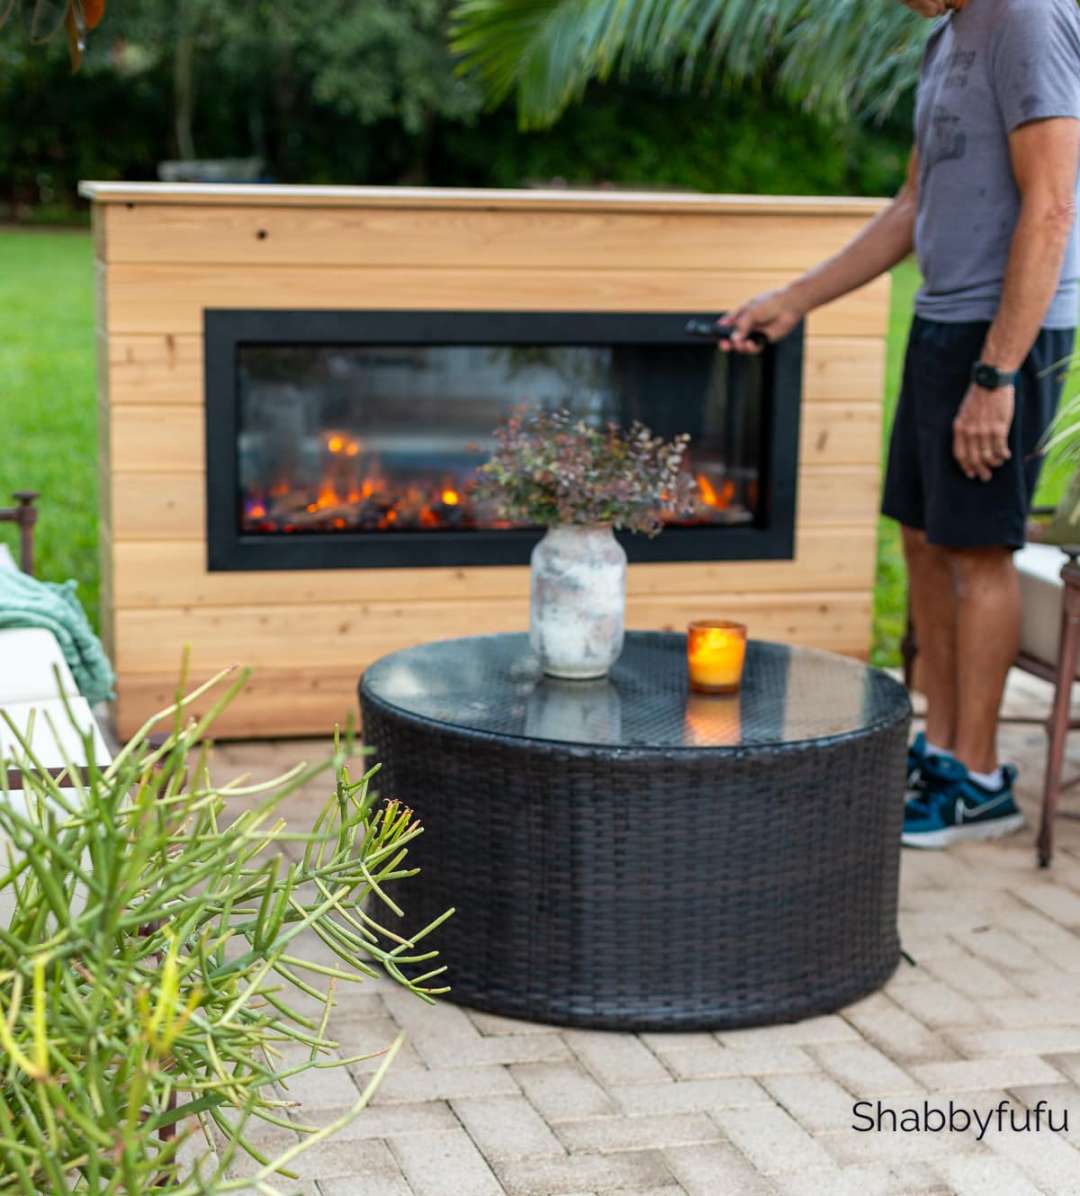 How To Build An Outdoor Fireplace - The Easy Way - shabbyfufu